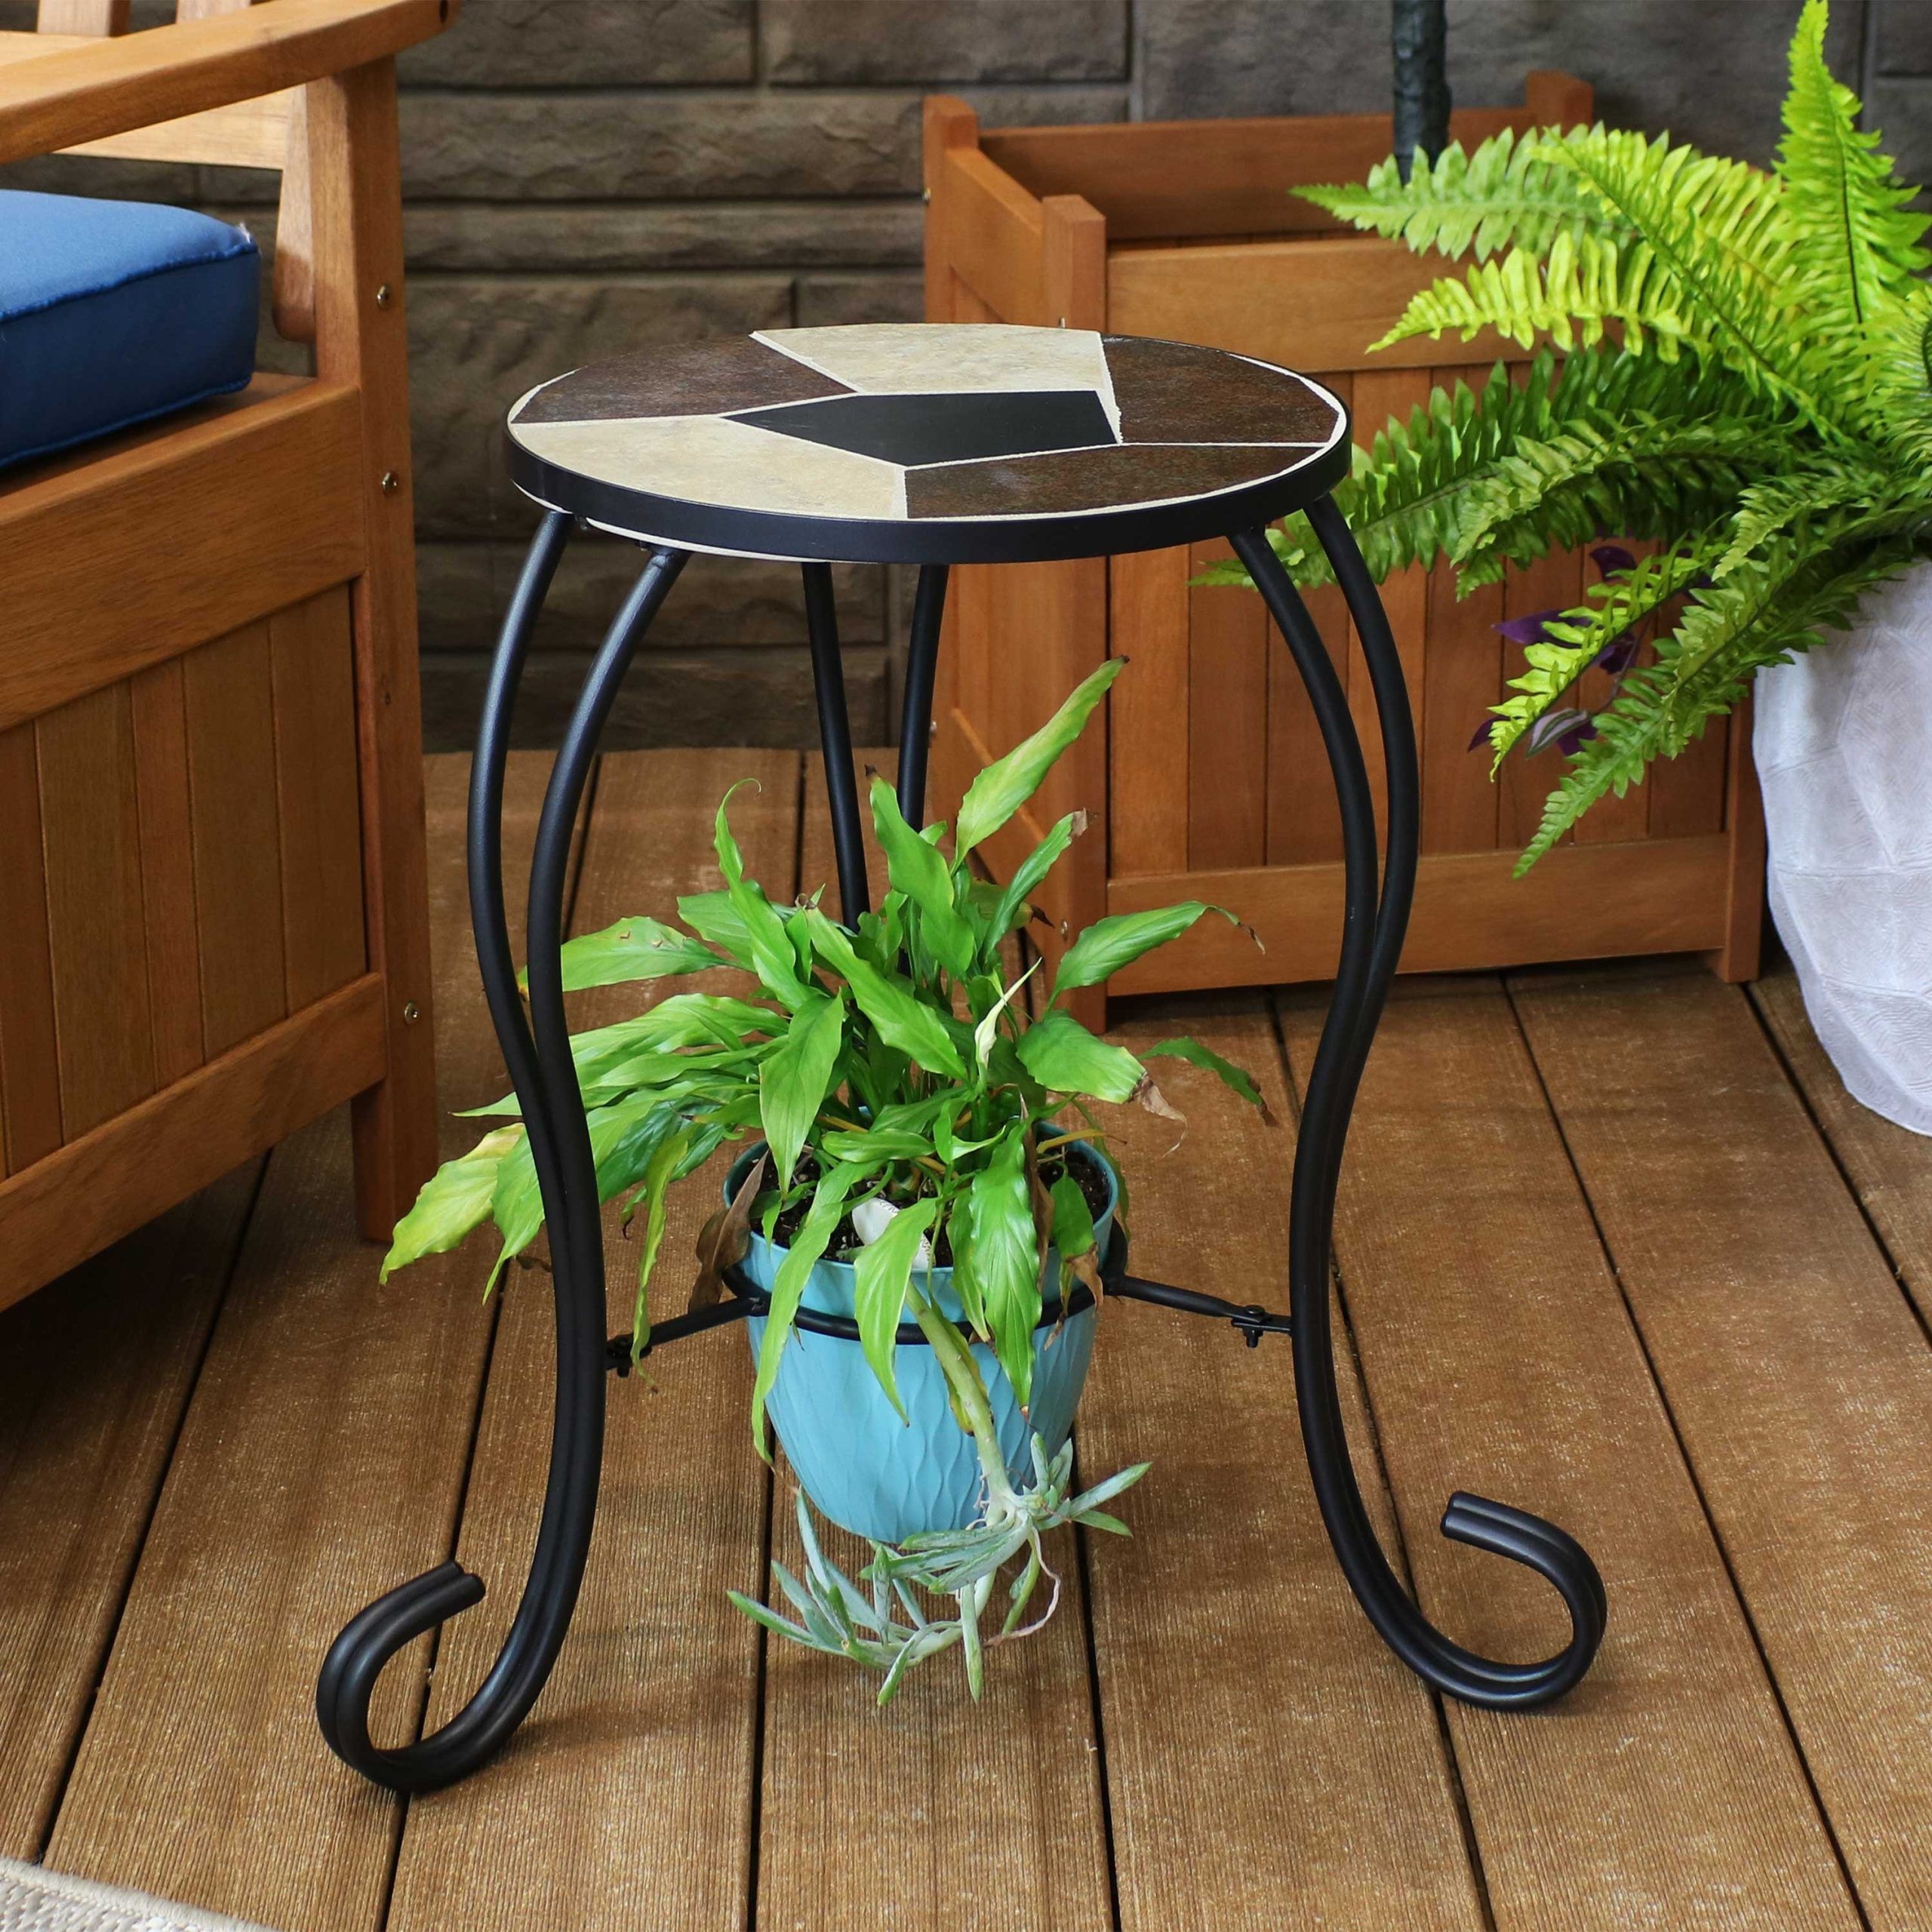 Sunnydaze 12 Inch Mosaic Ceramic Tile Side Table/ Plant Stand – Steel Frame  – Overstock – 31954096 With Plant Stands With Side Table (View 10 of 15)